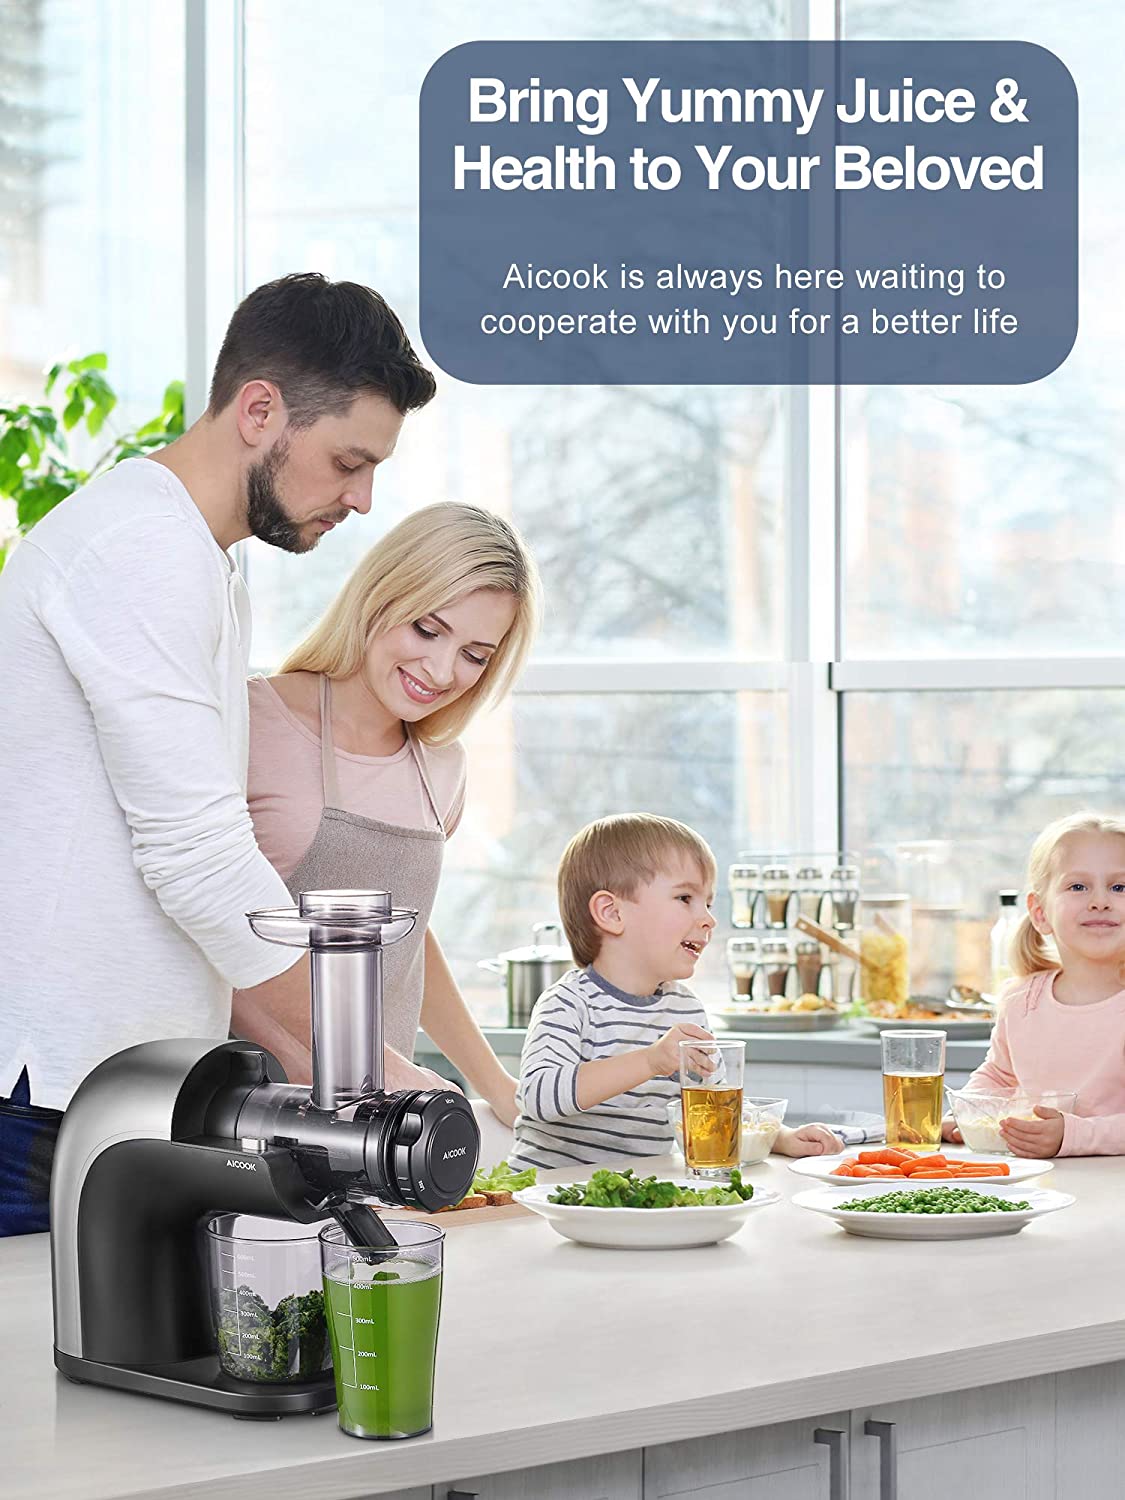 Aicook | High Nutrition Cold Press Juicer, No Filter Design with Less Oxidation, Juice Recipes for Whole Vegetables and Fruits, Multiple Modes for Different Flavors, Healthy, Yummy